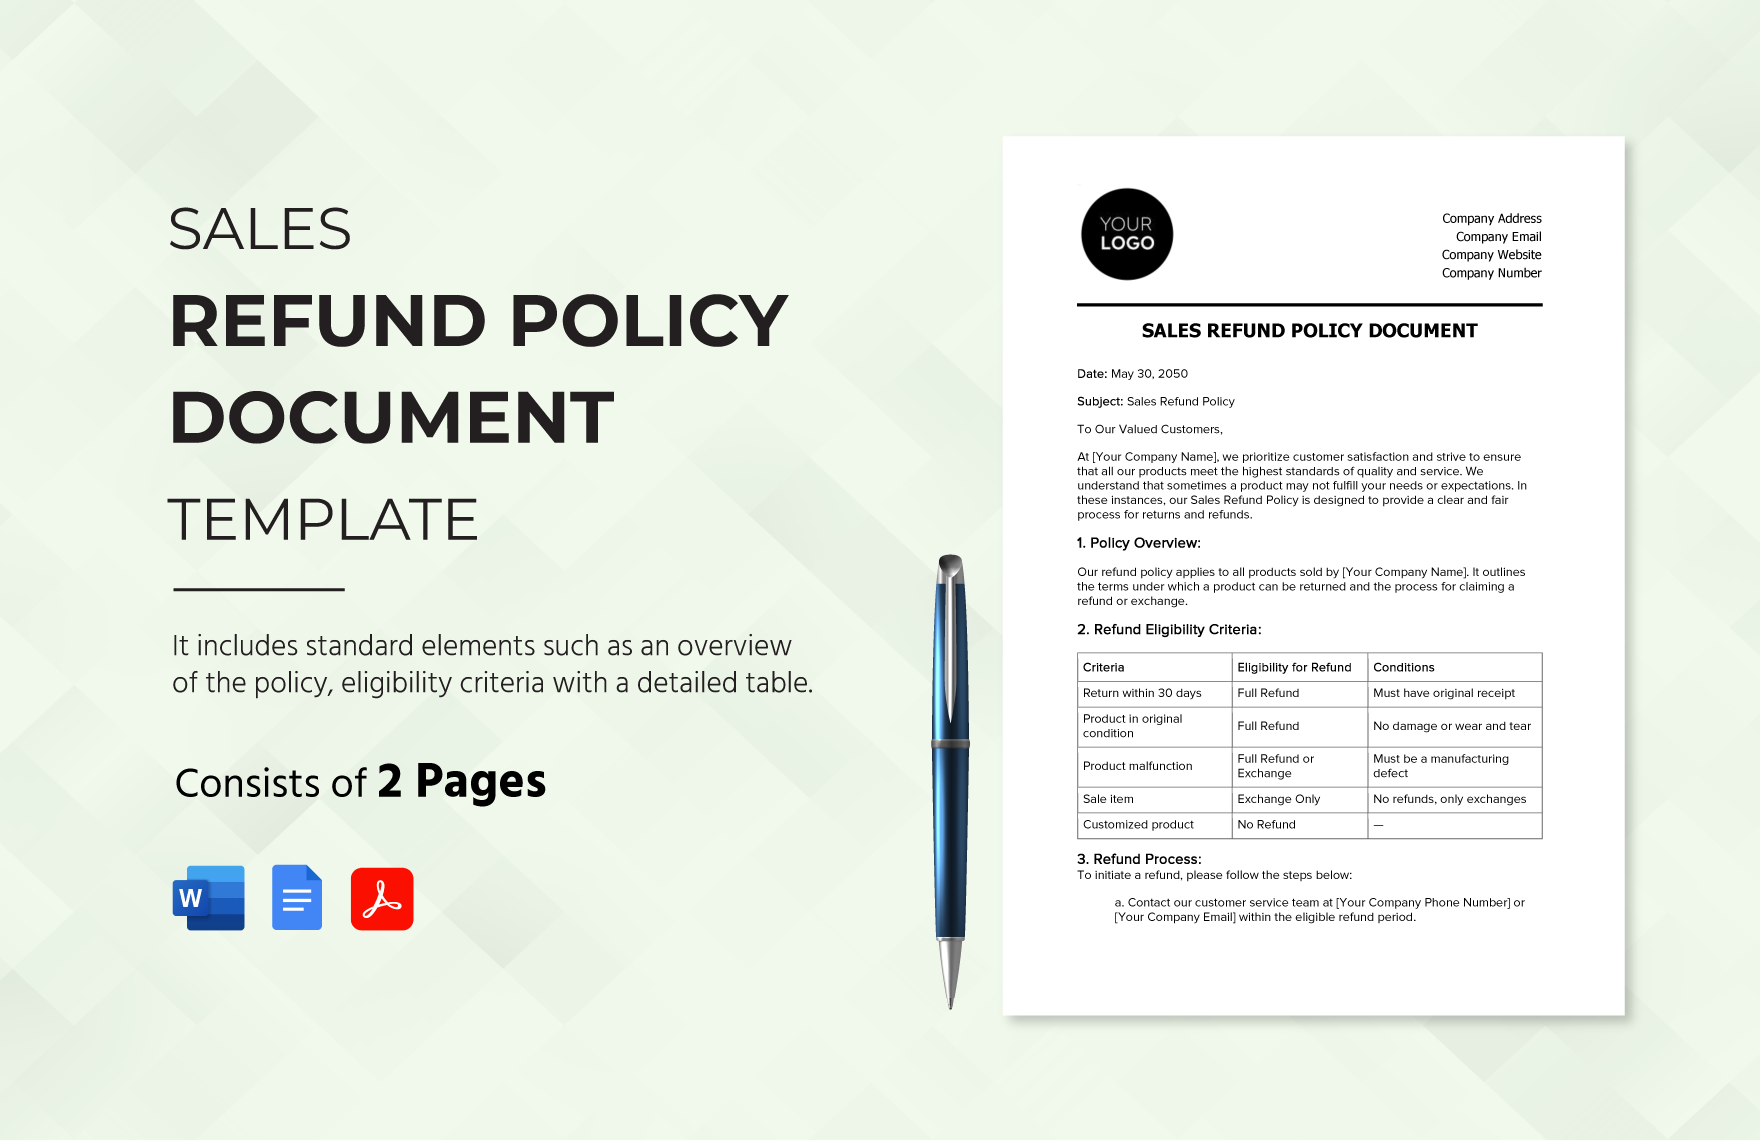 Sales Refund Policy Document Template